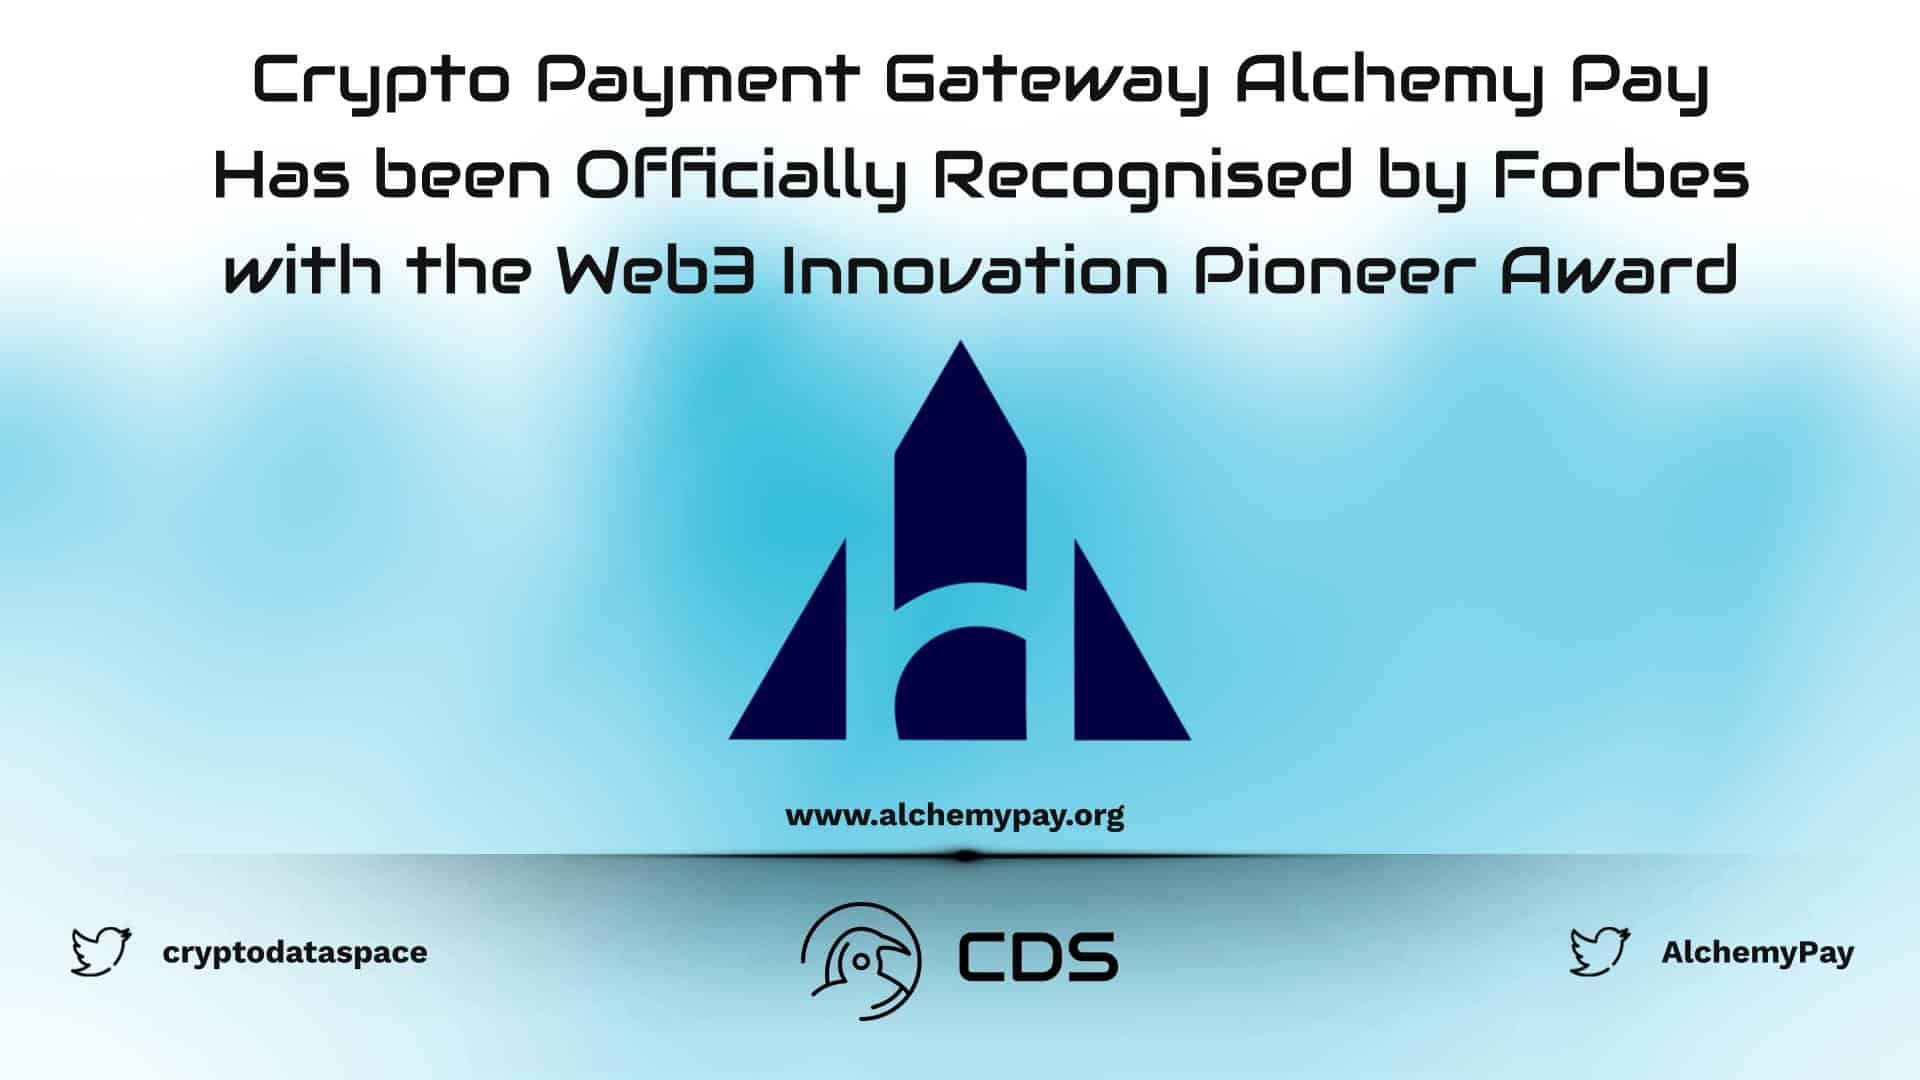 Crypto Payment Gateway Alchemy Pay Has been Officially Recognised by Forbes with the Web3 Innovation Pioneer Award